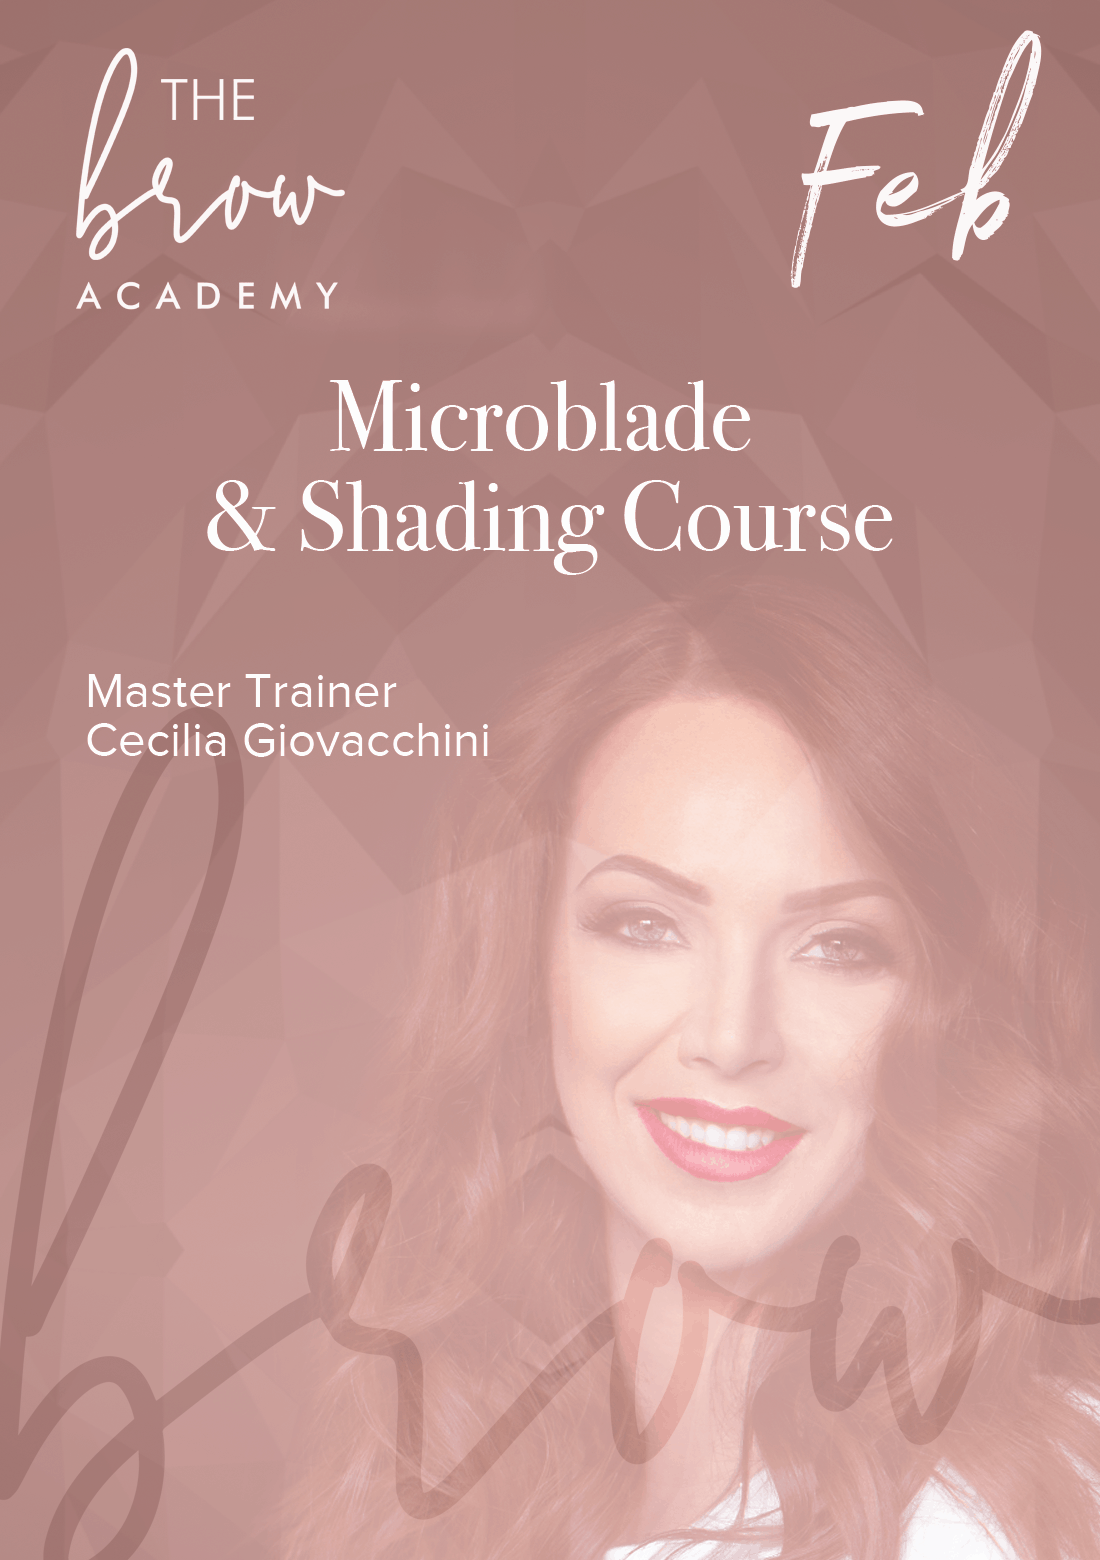 East Bay Microblading Courses - February